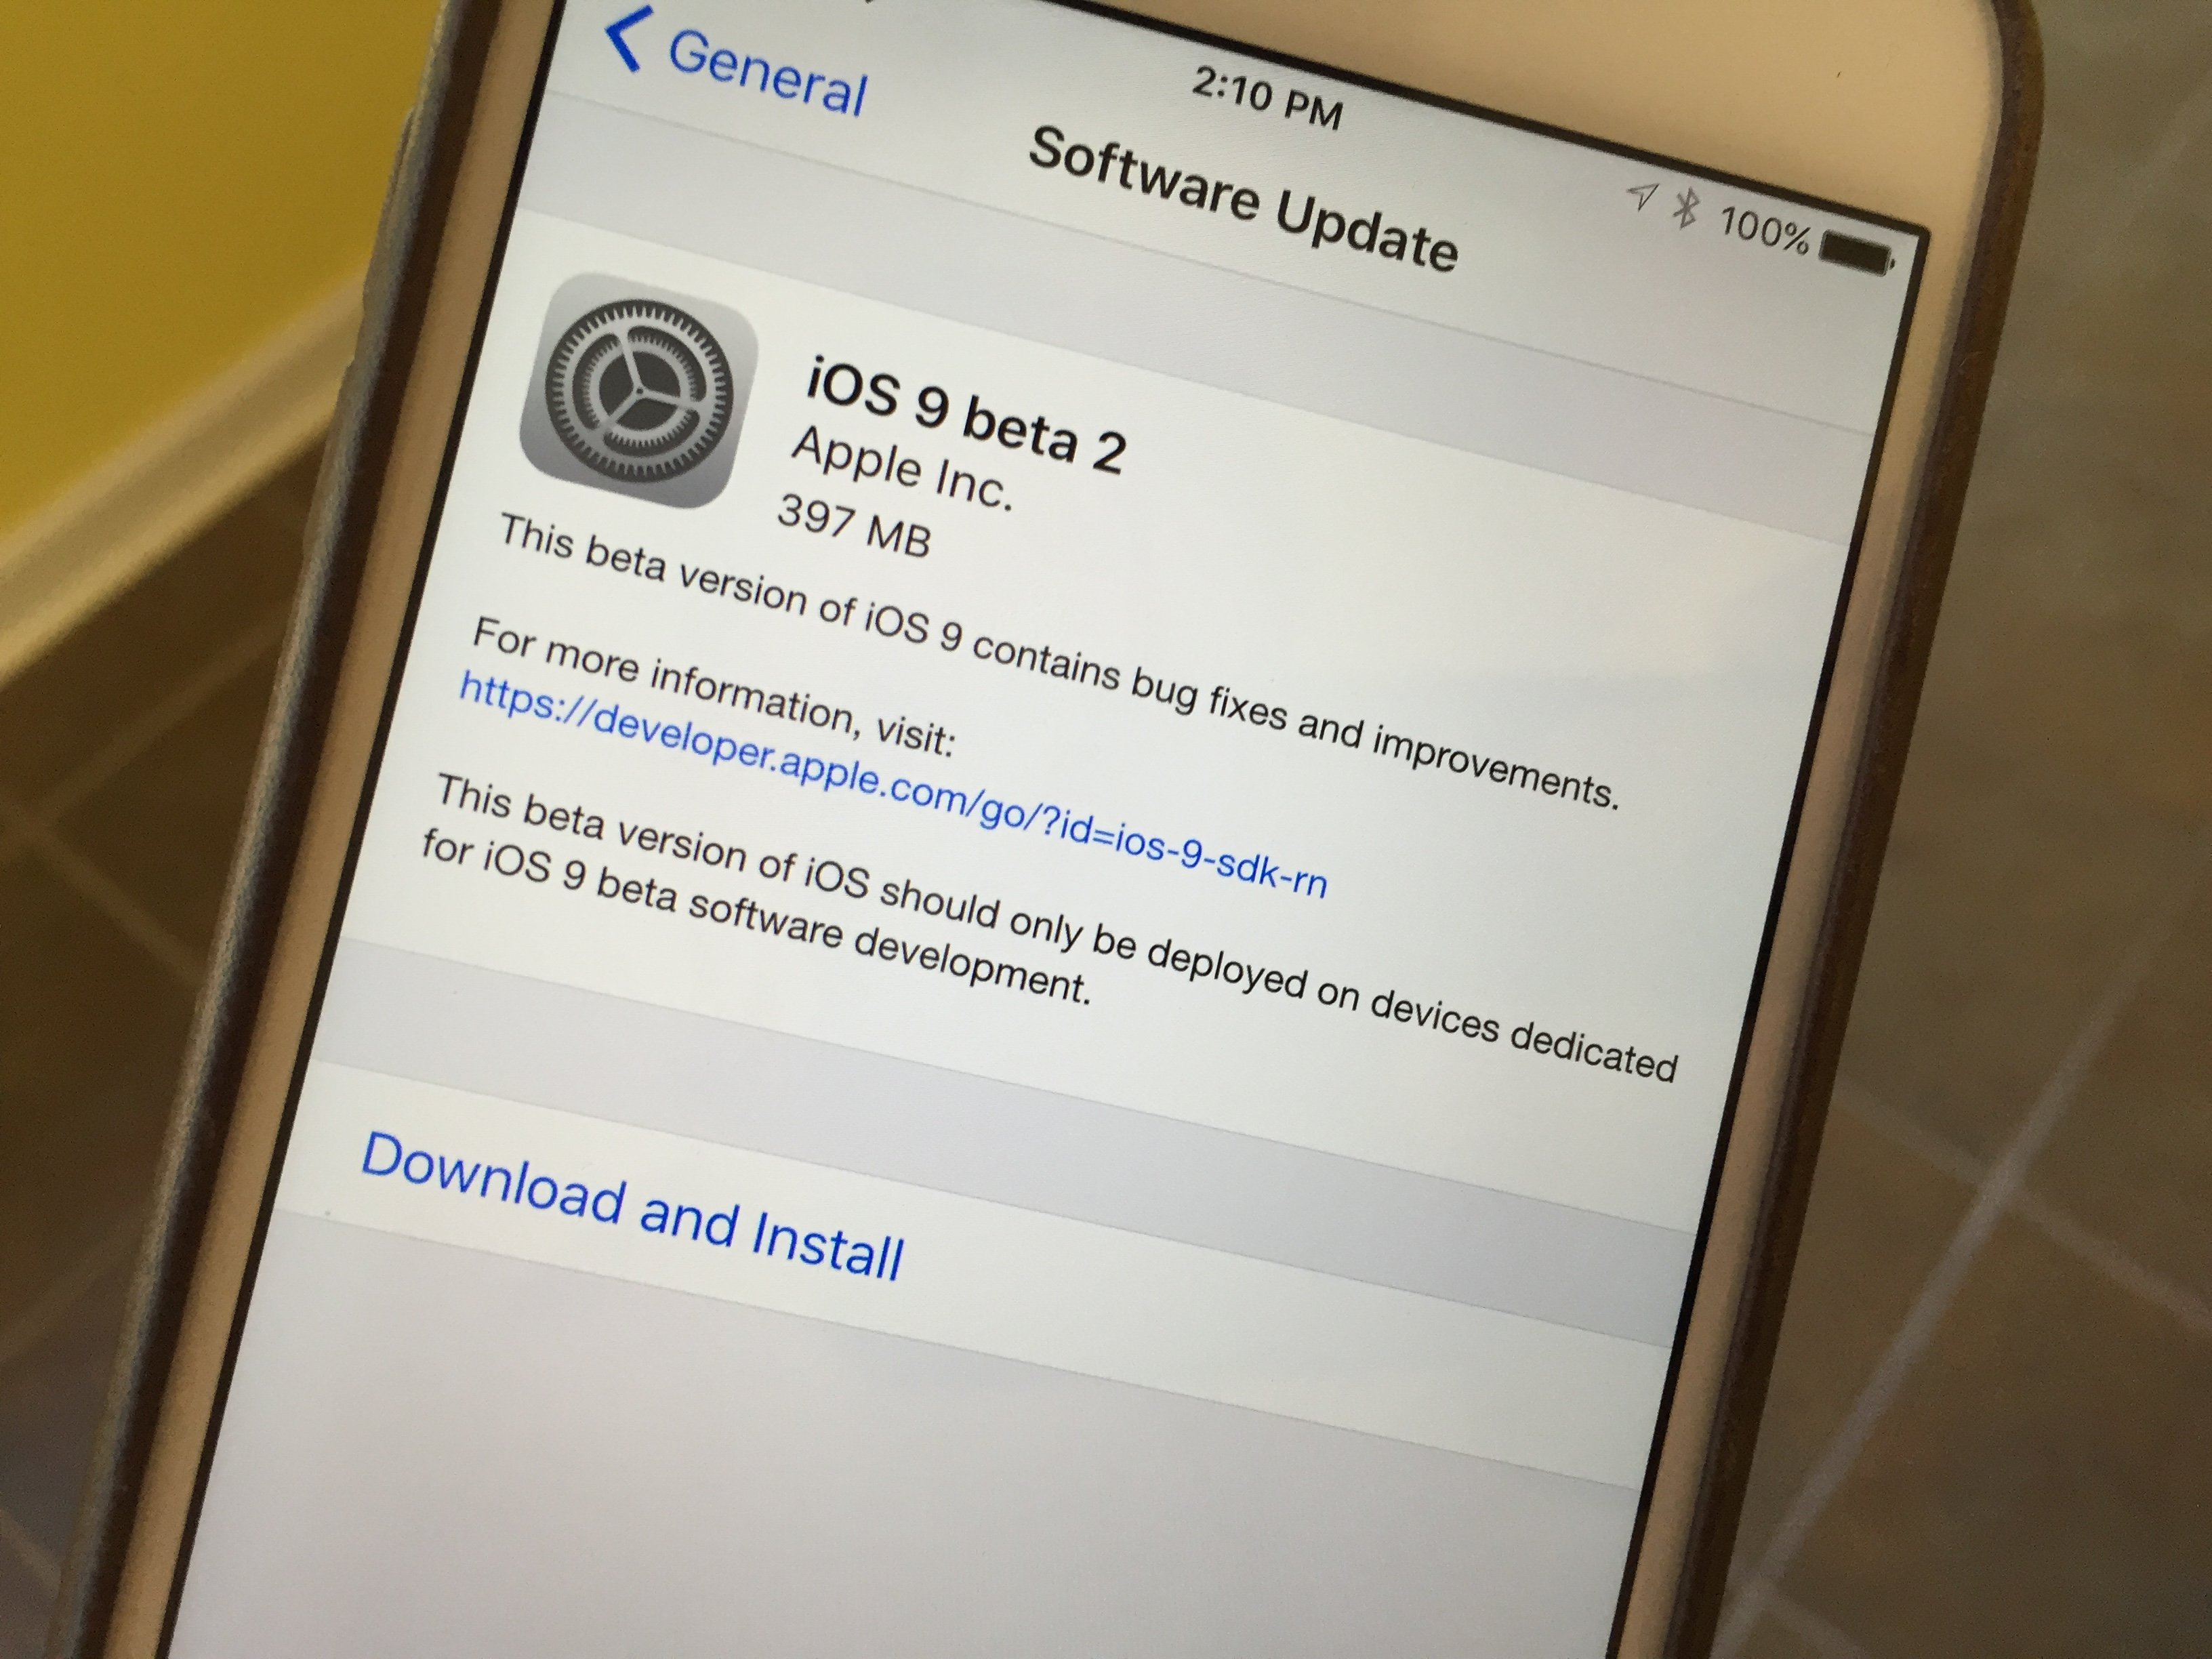 What you need to do to get ready for the public IOS 9 beta release.